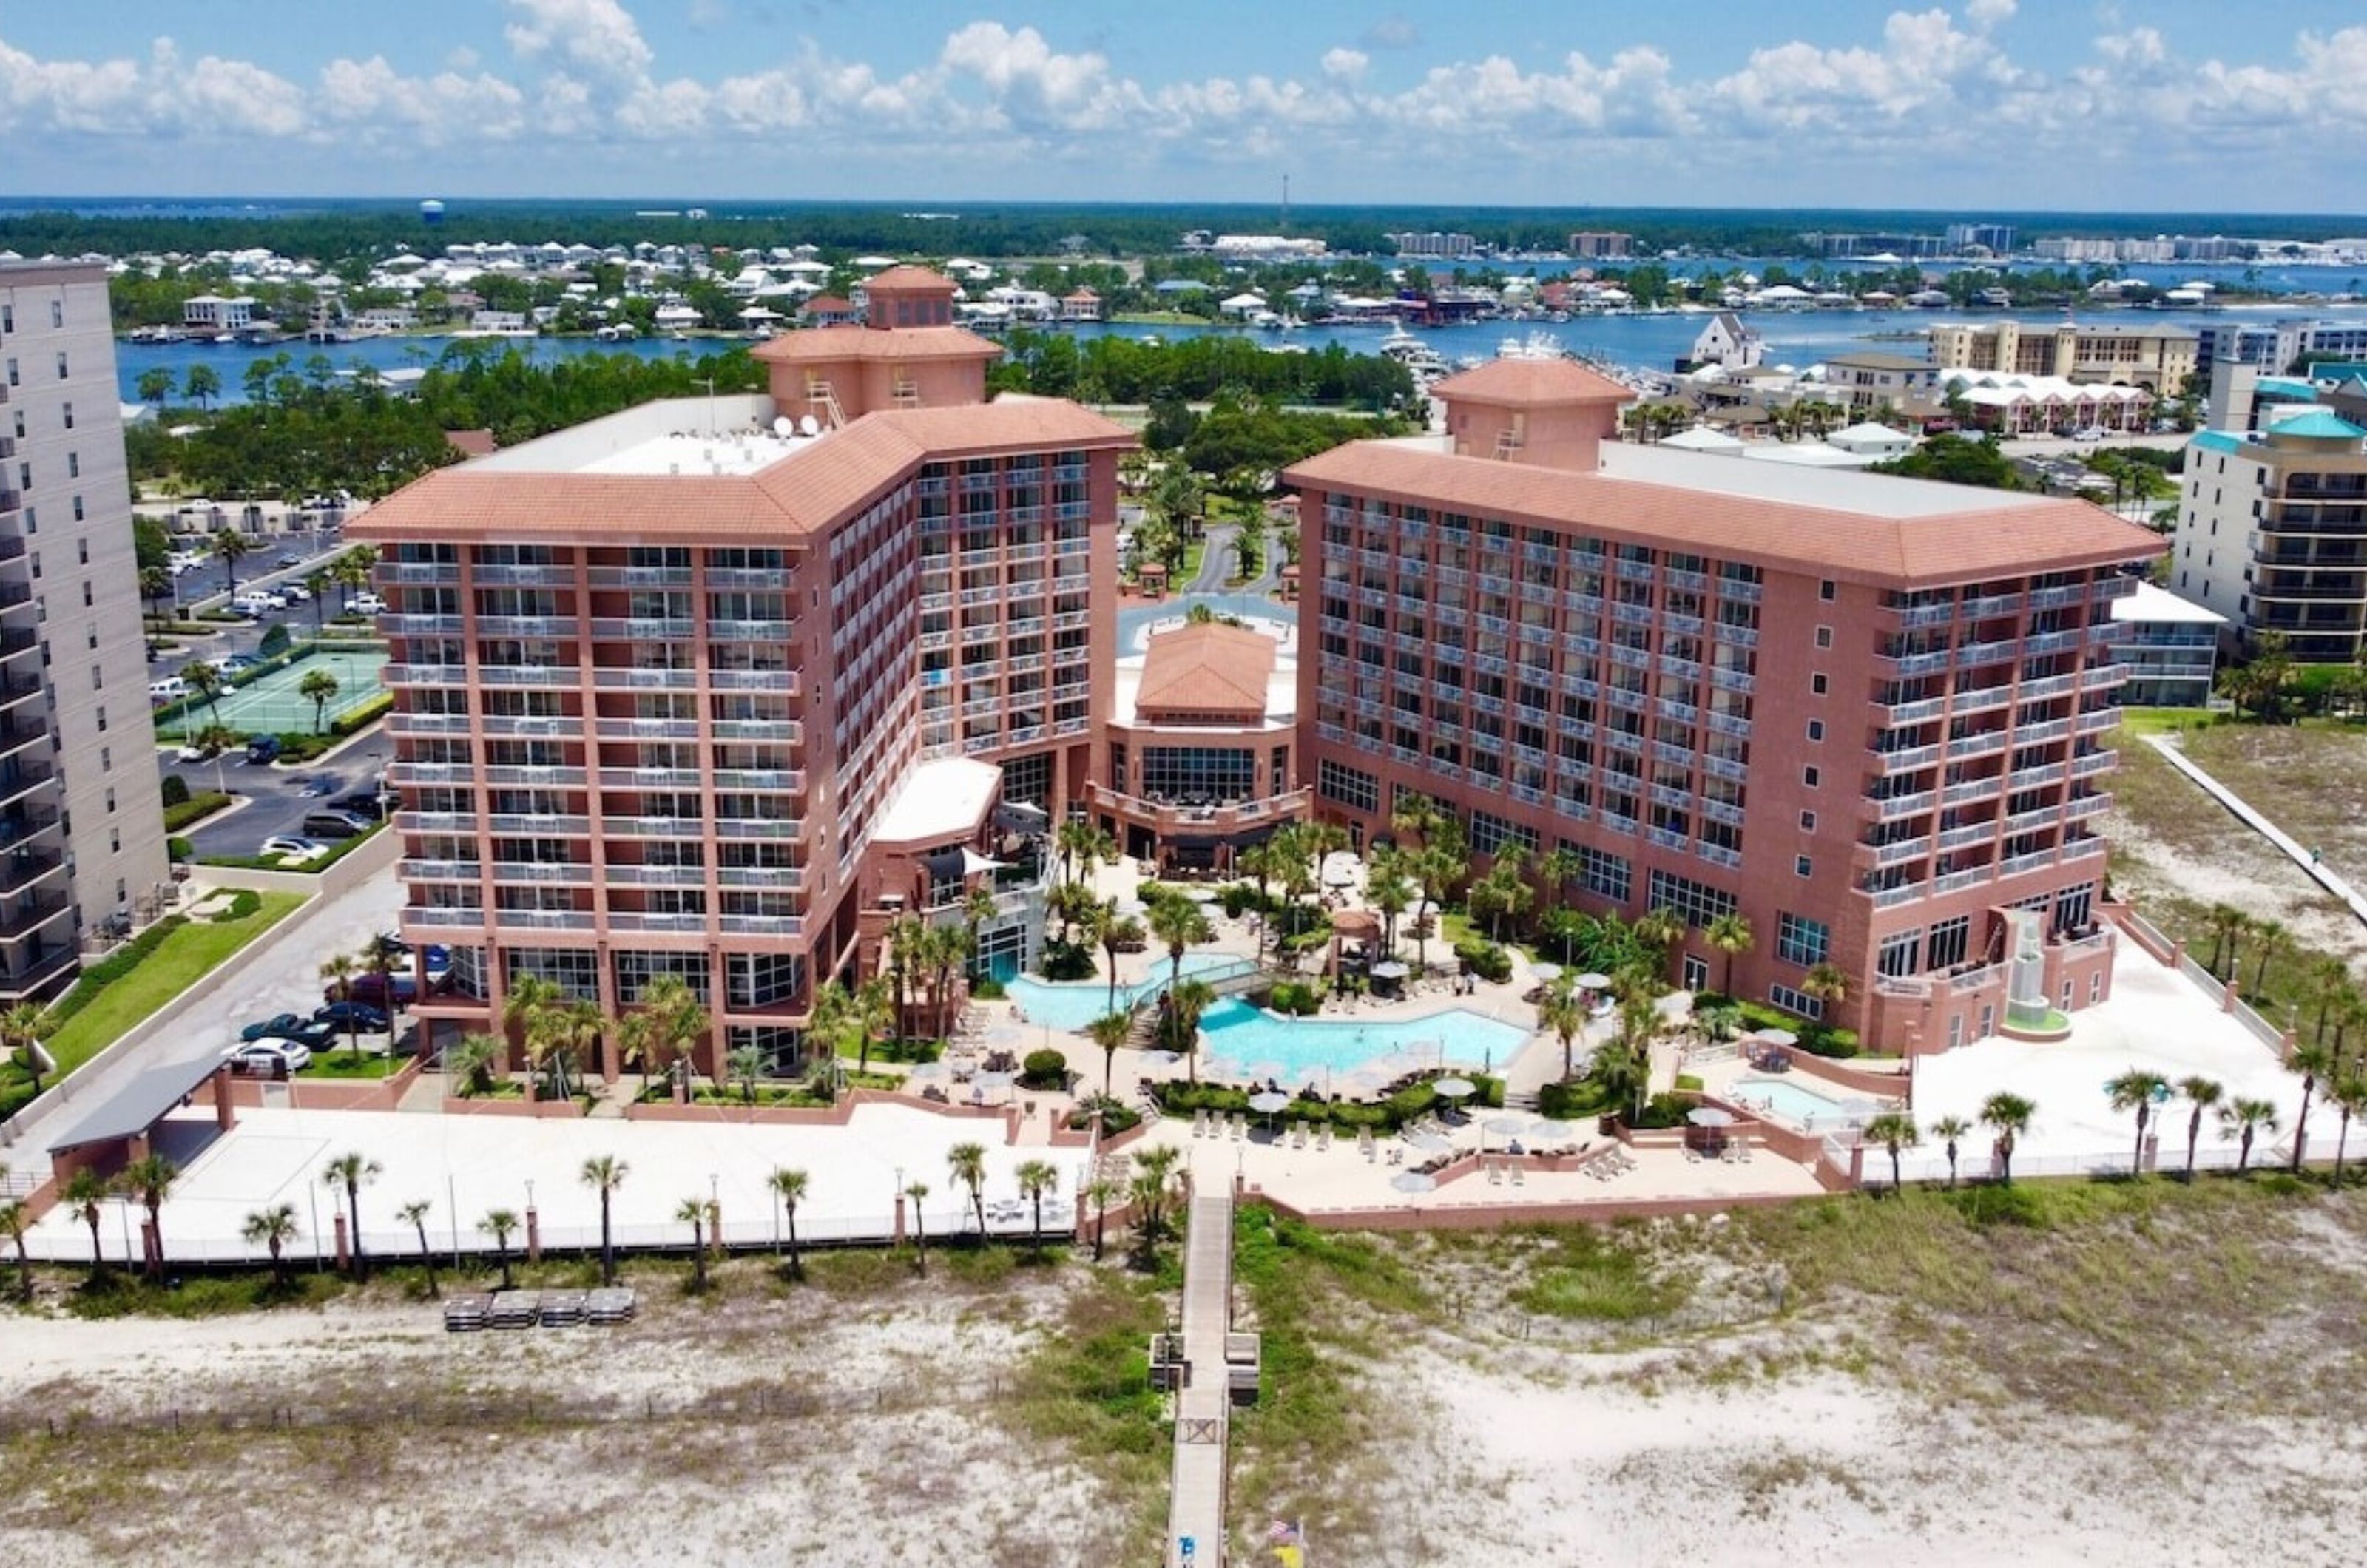 Birds eye view of Perdido Beach Resort with the outdoor pool deck and boardwalk 